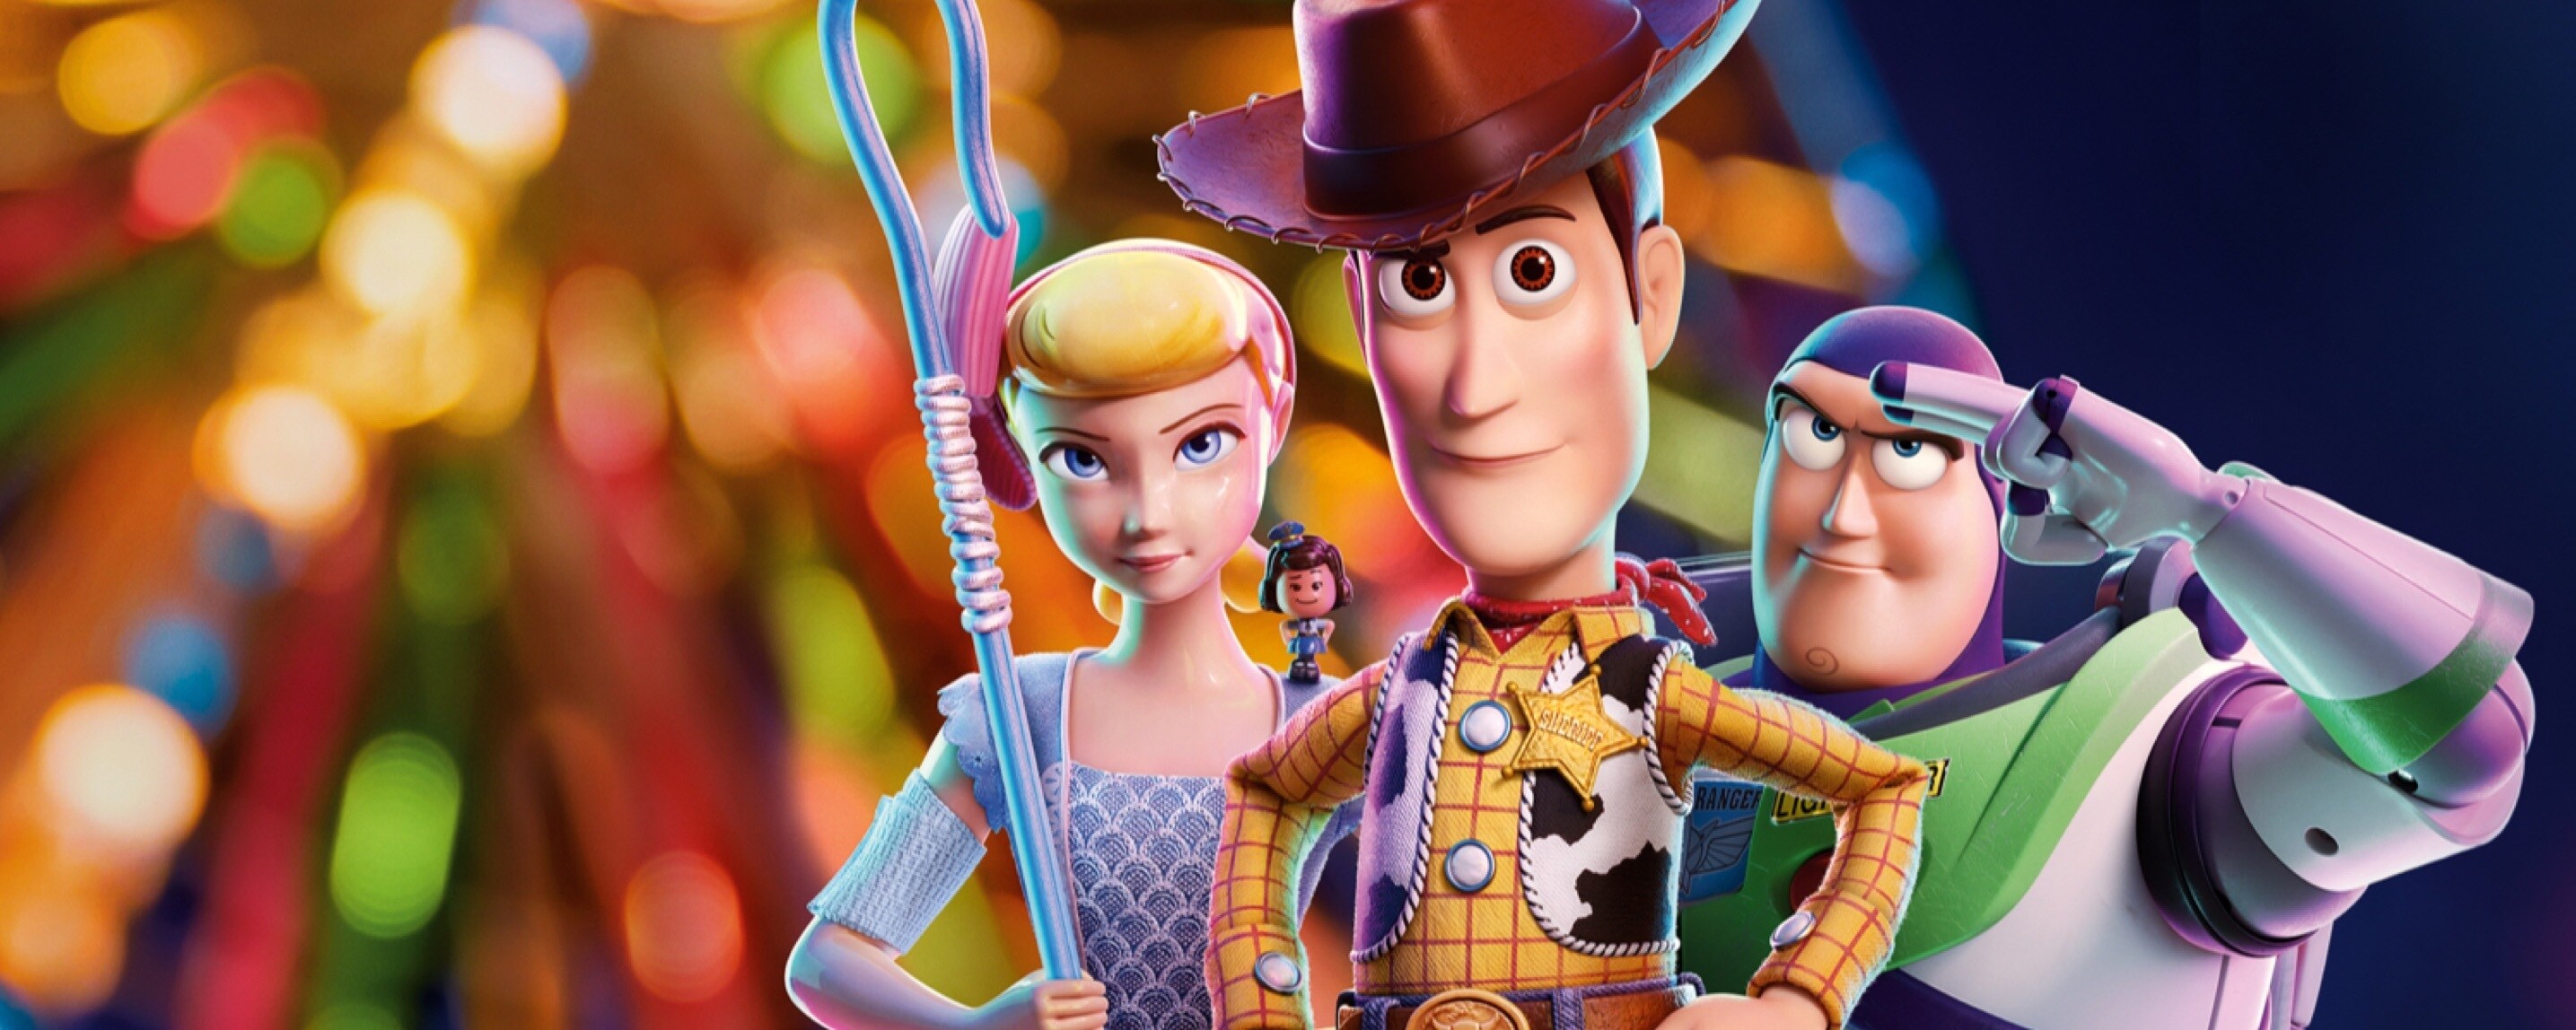 Toy Story 4 – Charlélie Couture rejoint l’aventure !